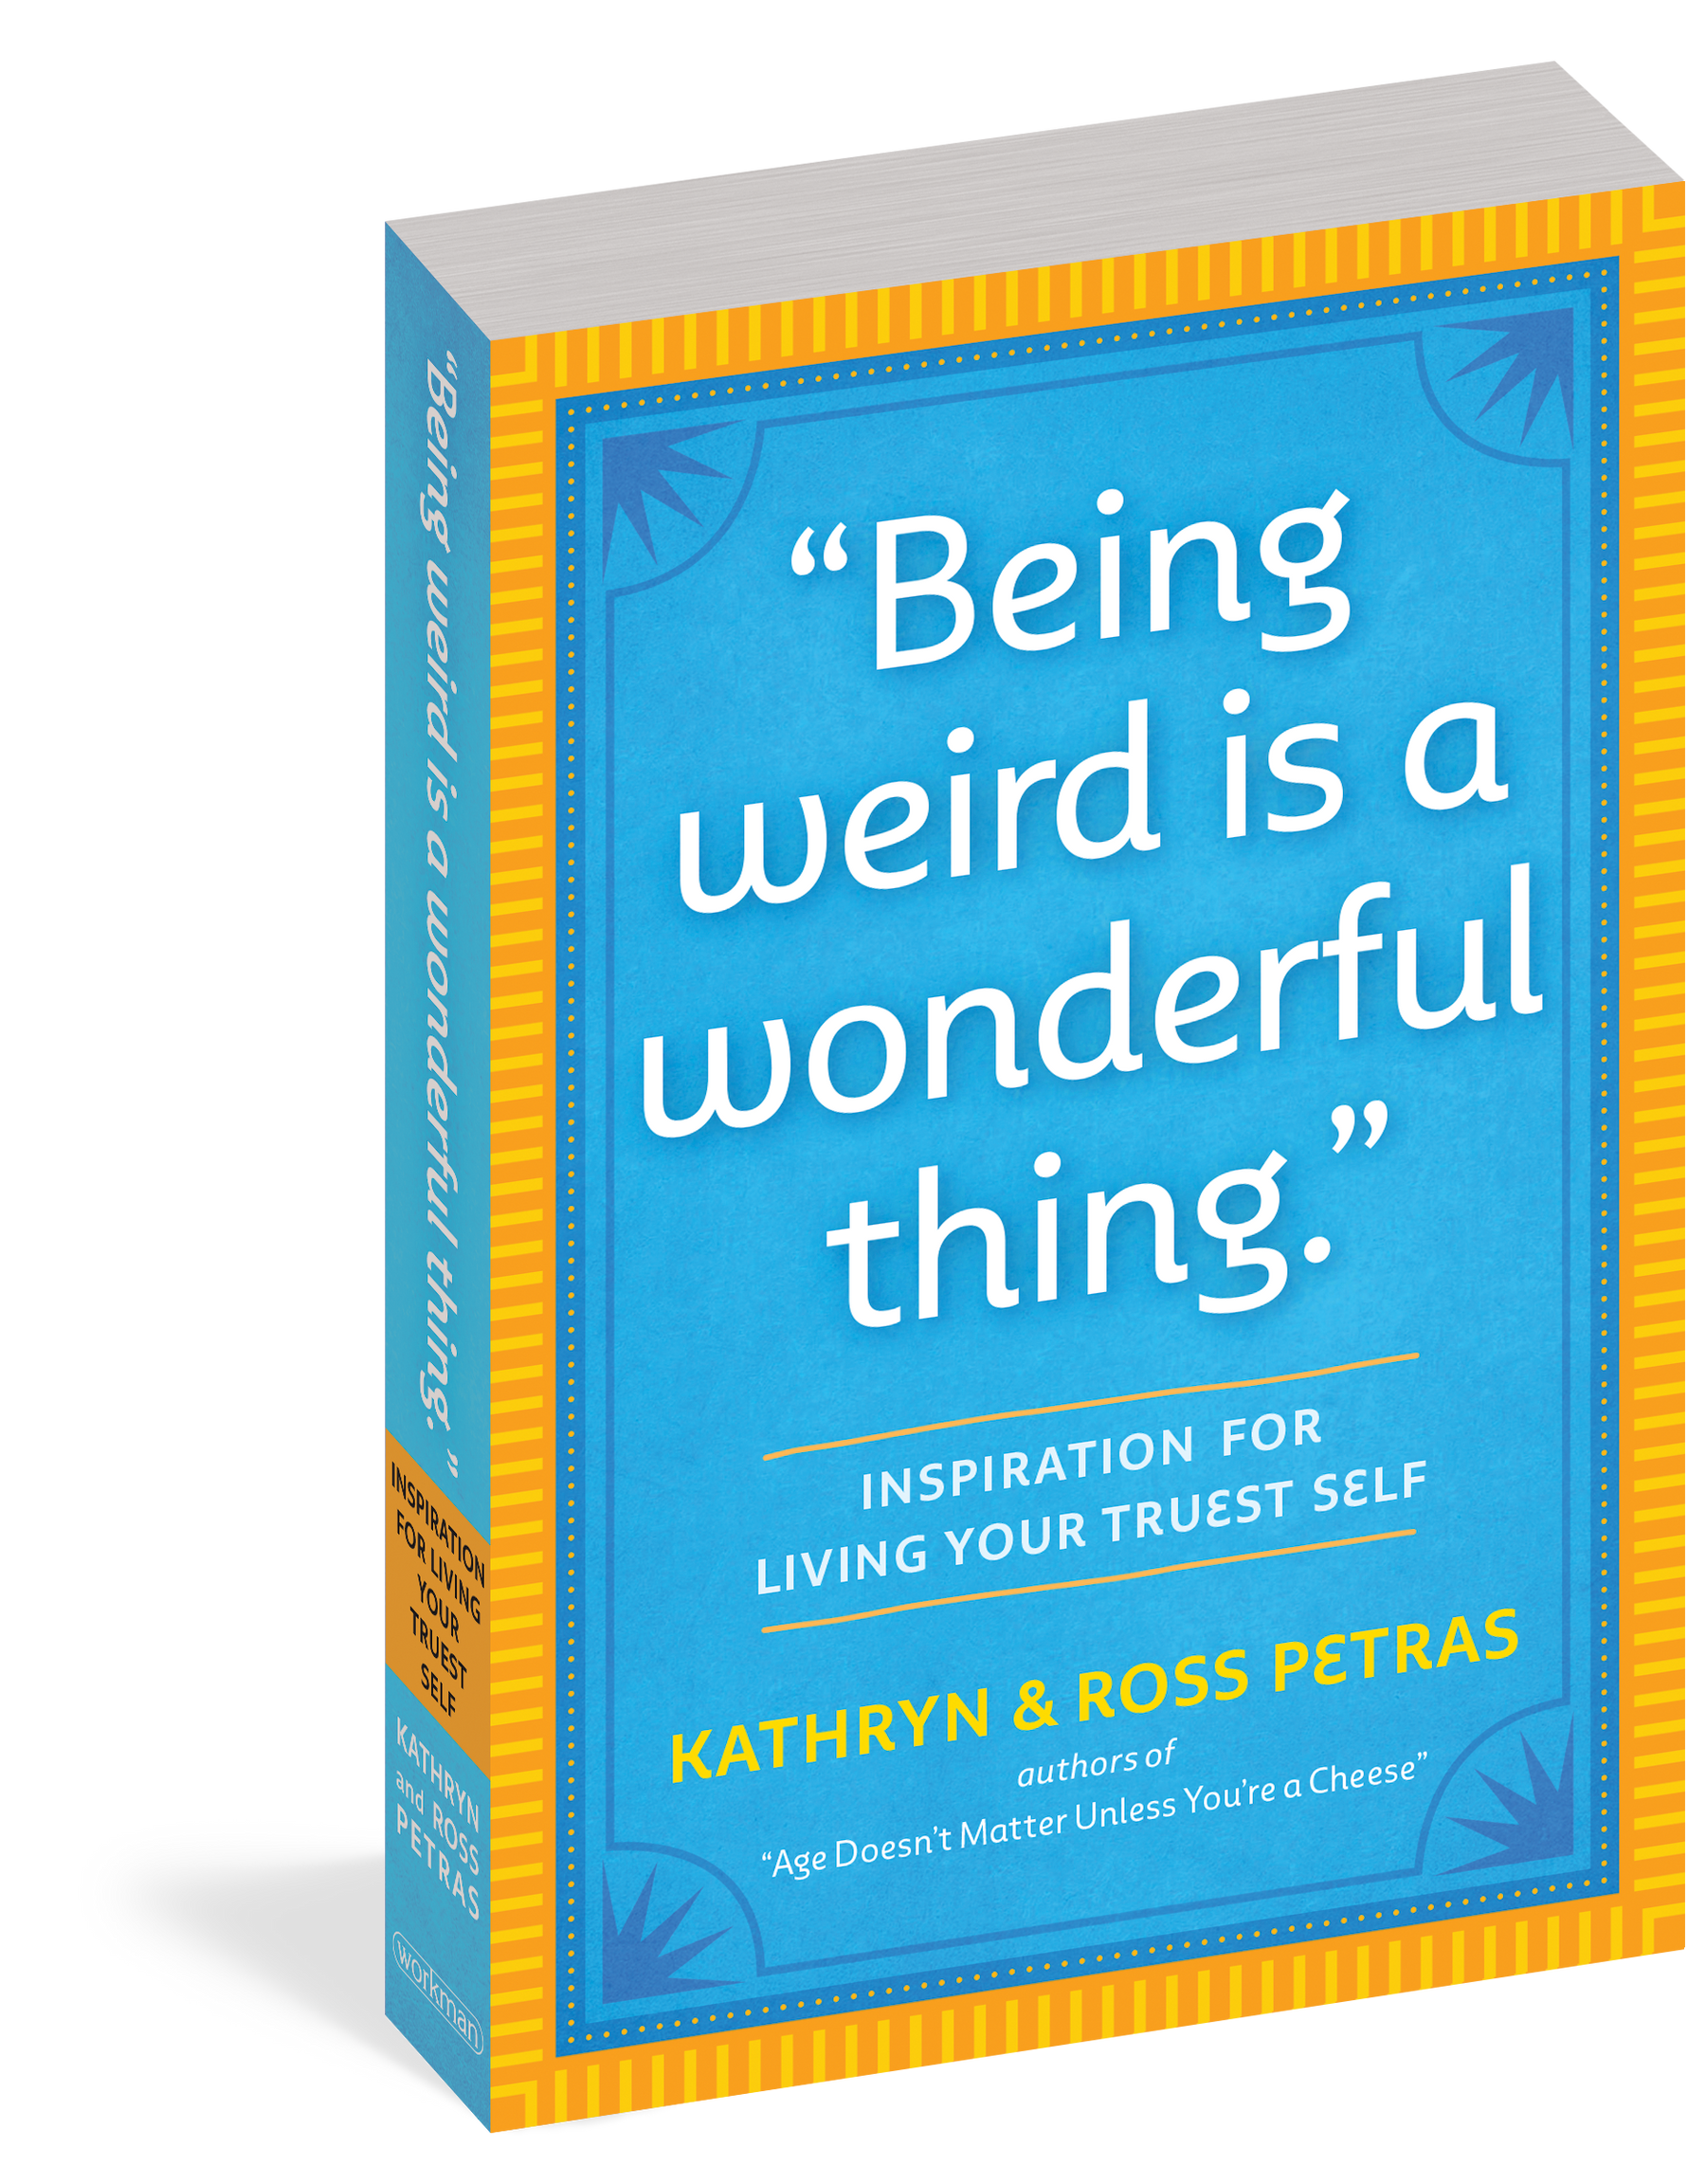 "Being Weird Is a Wonderful Thing"